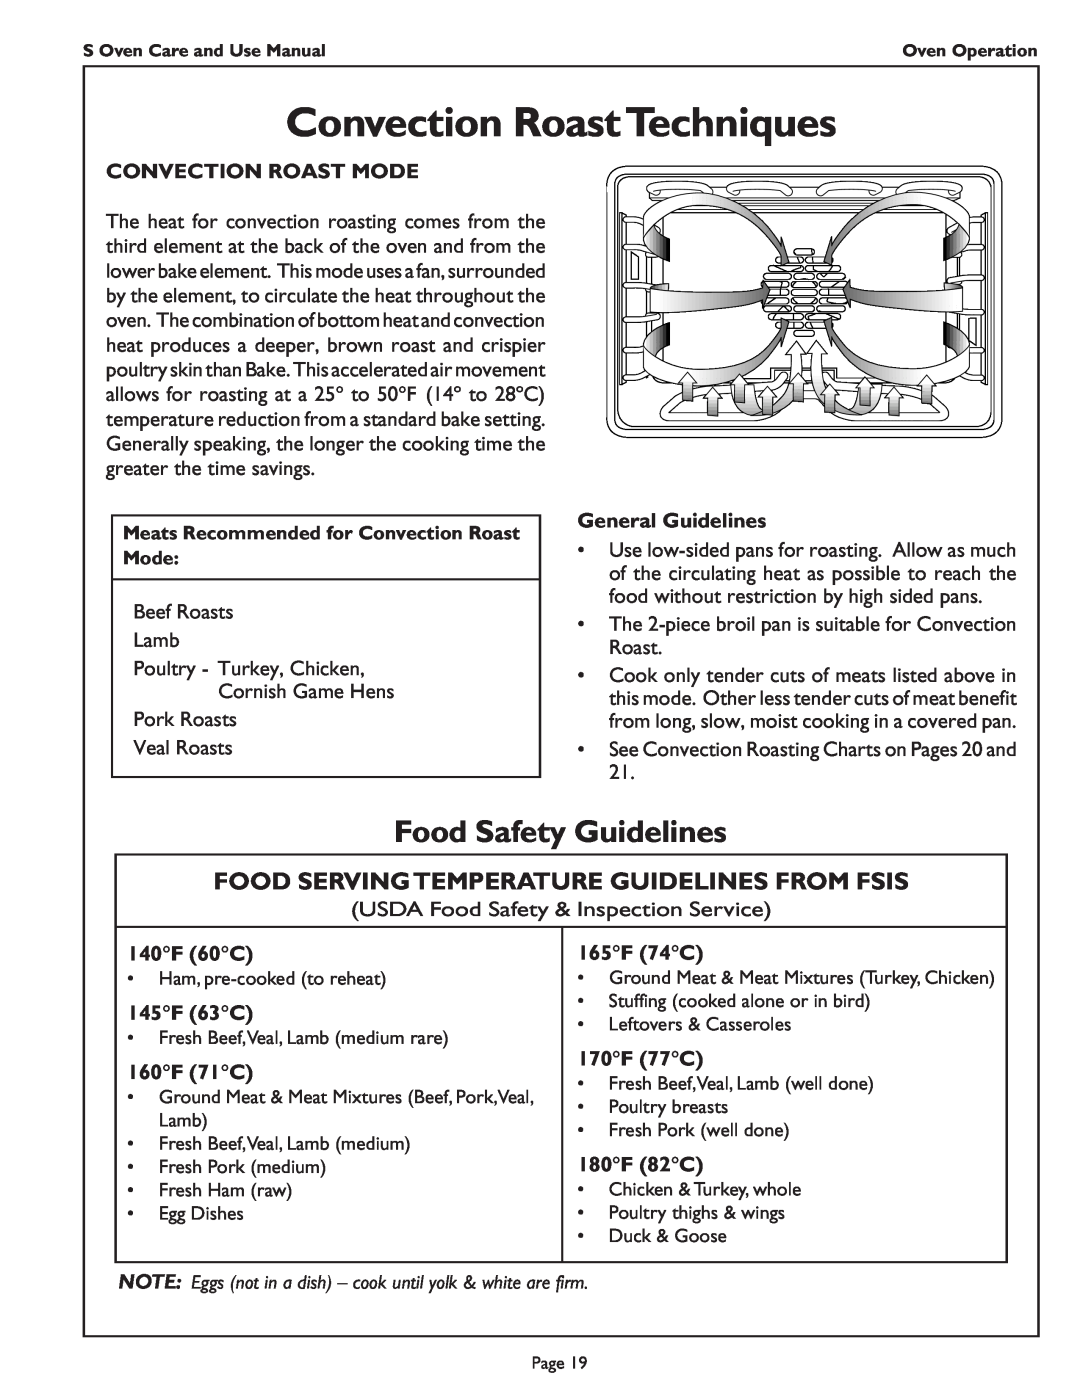 Thermador SCD272, SC301 Convection RoastTechniques, Food Safety Guidelines, Food Serving Temperature Guidelines From Fsis 